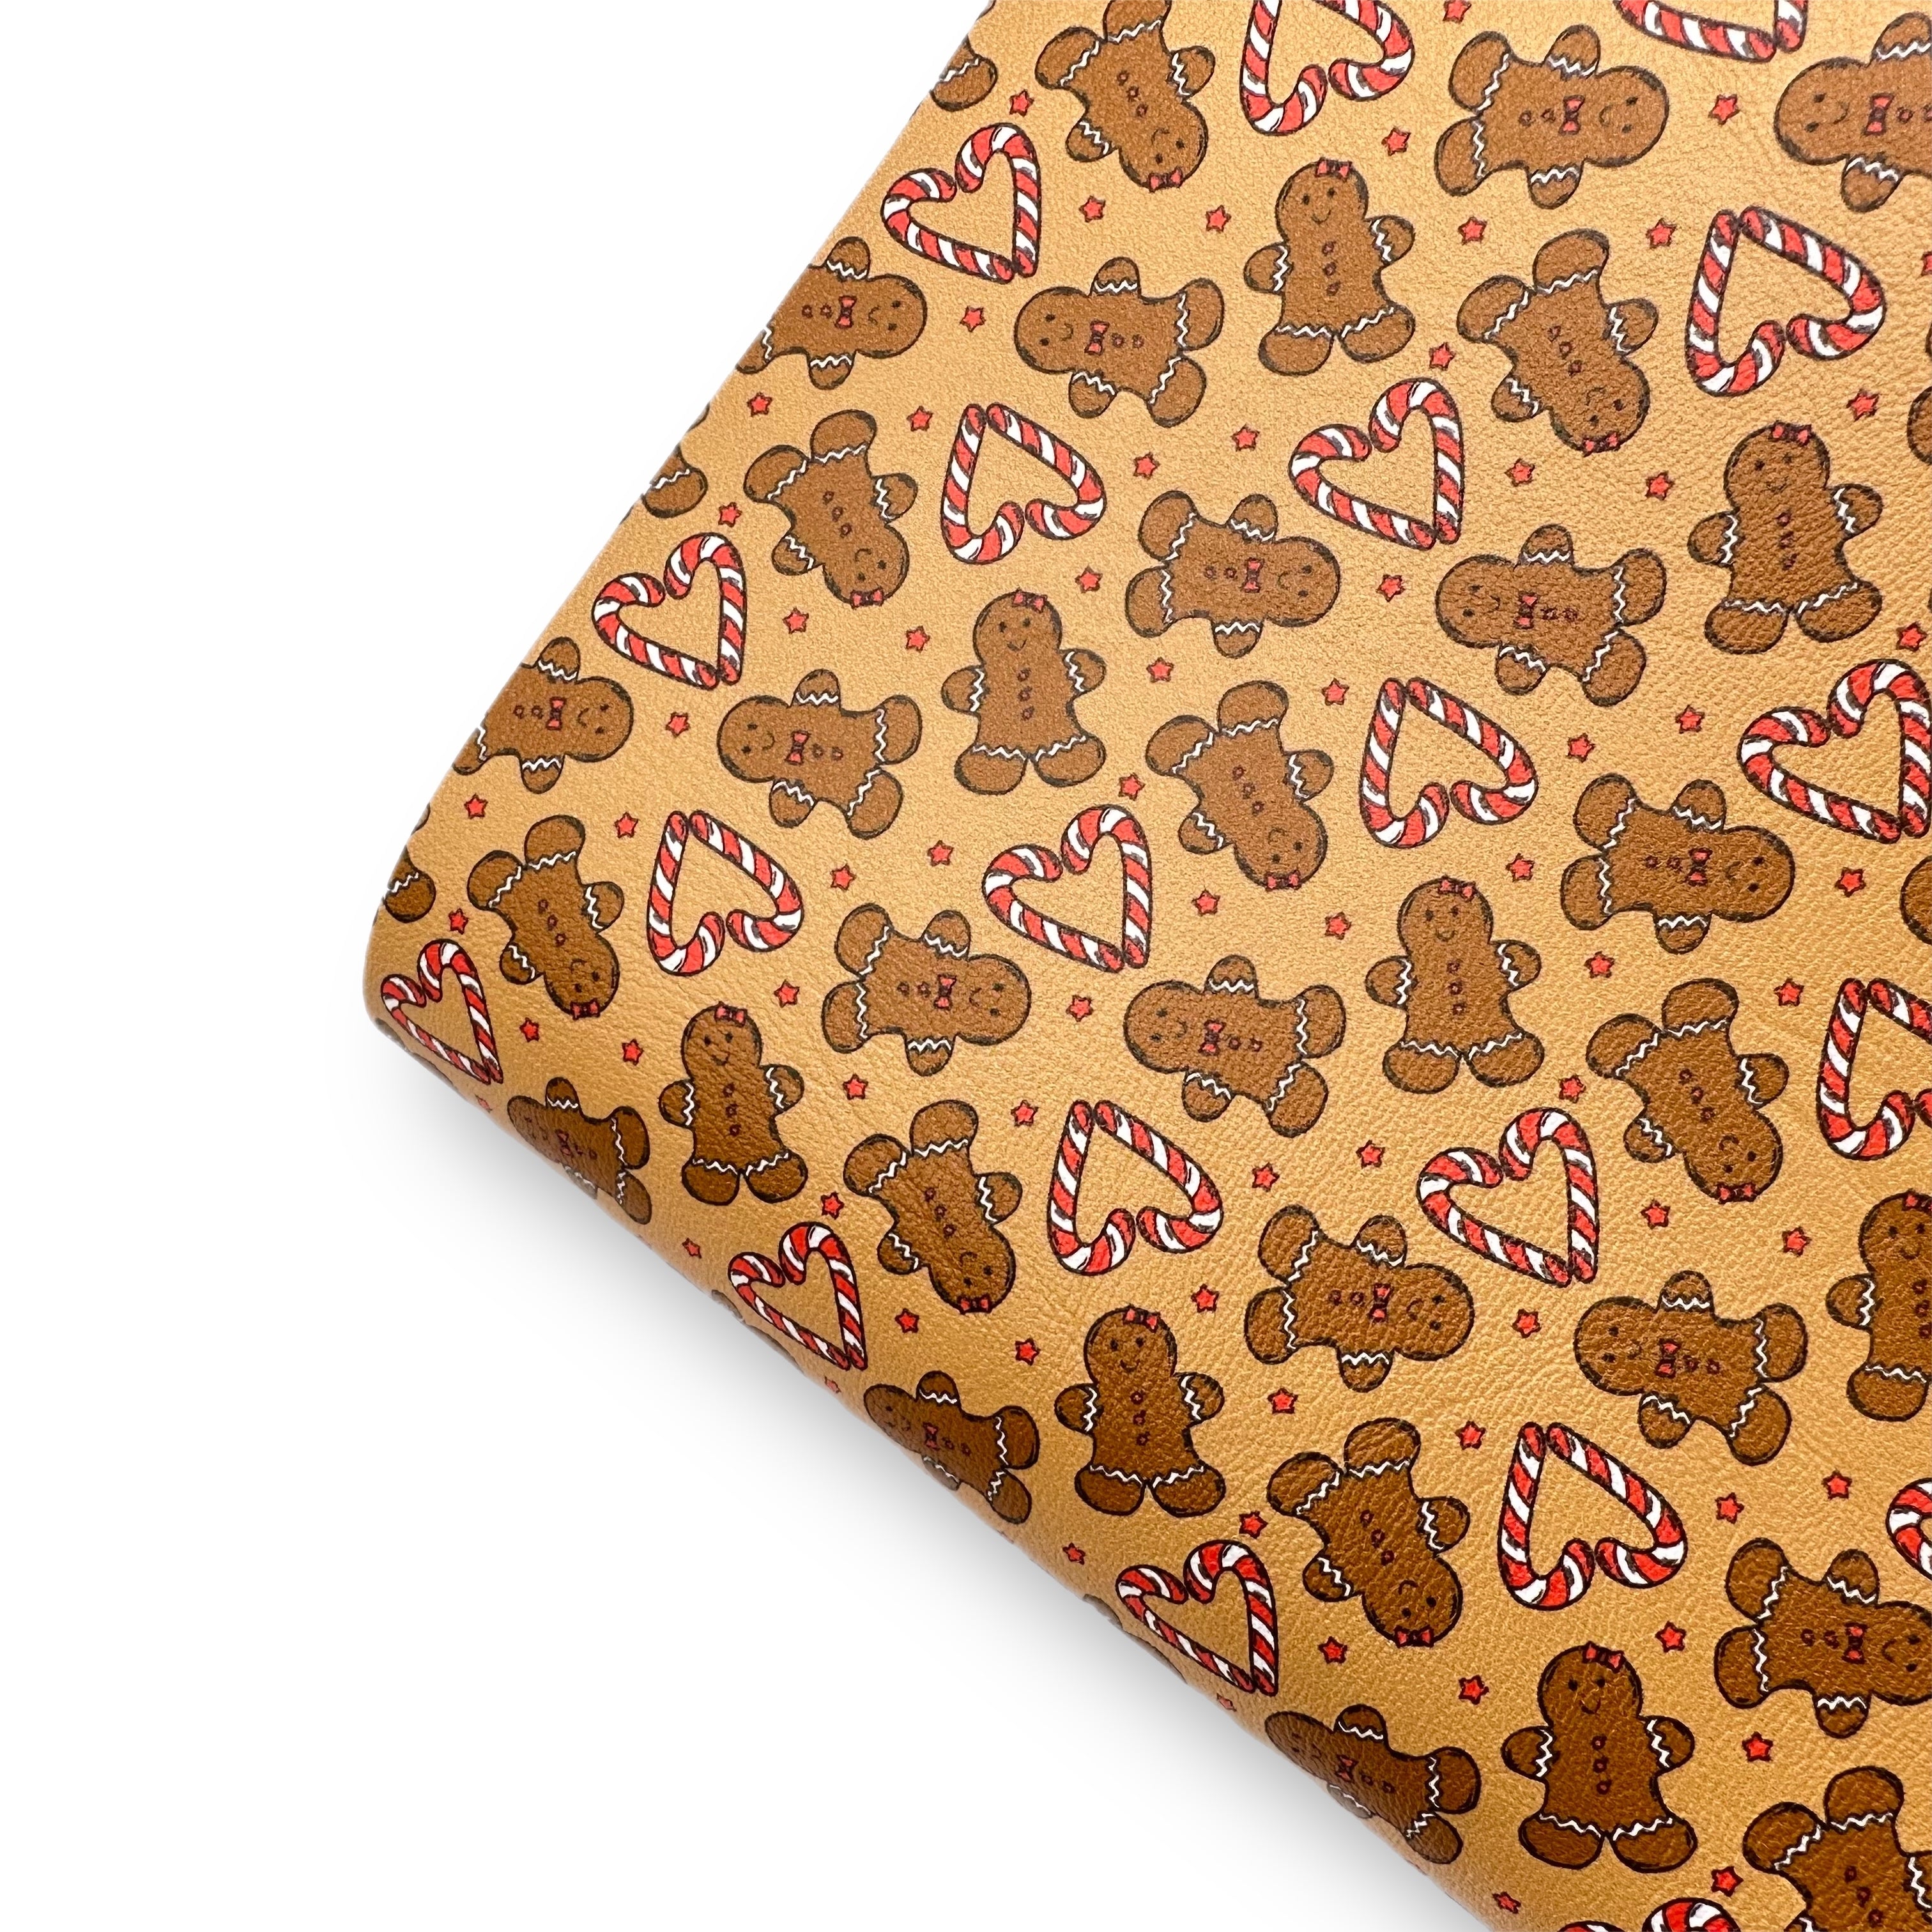 We Love Gingerbread Premium Faux Leather Fabric Sheets